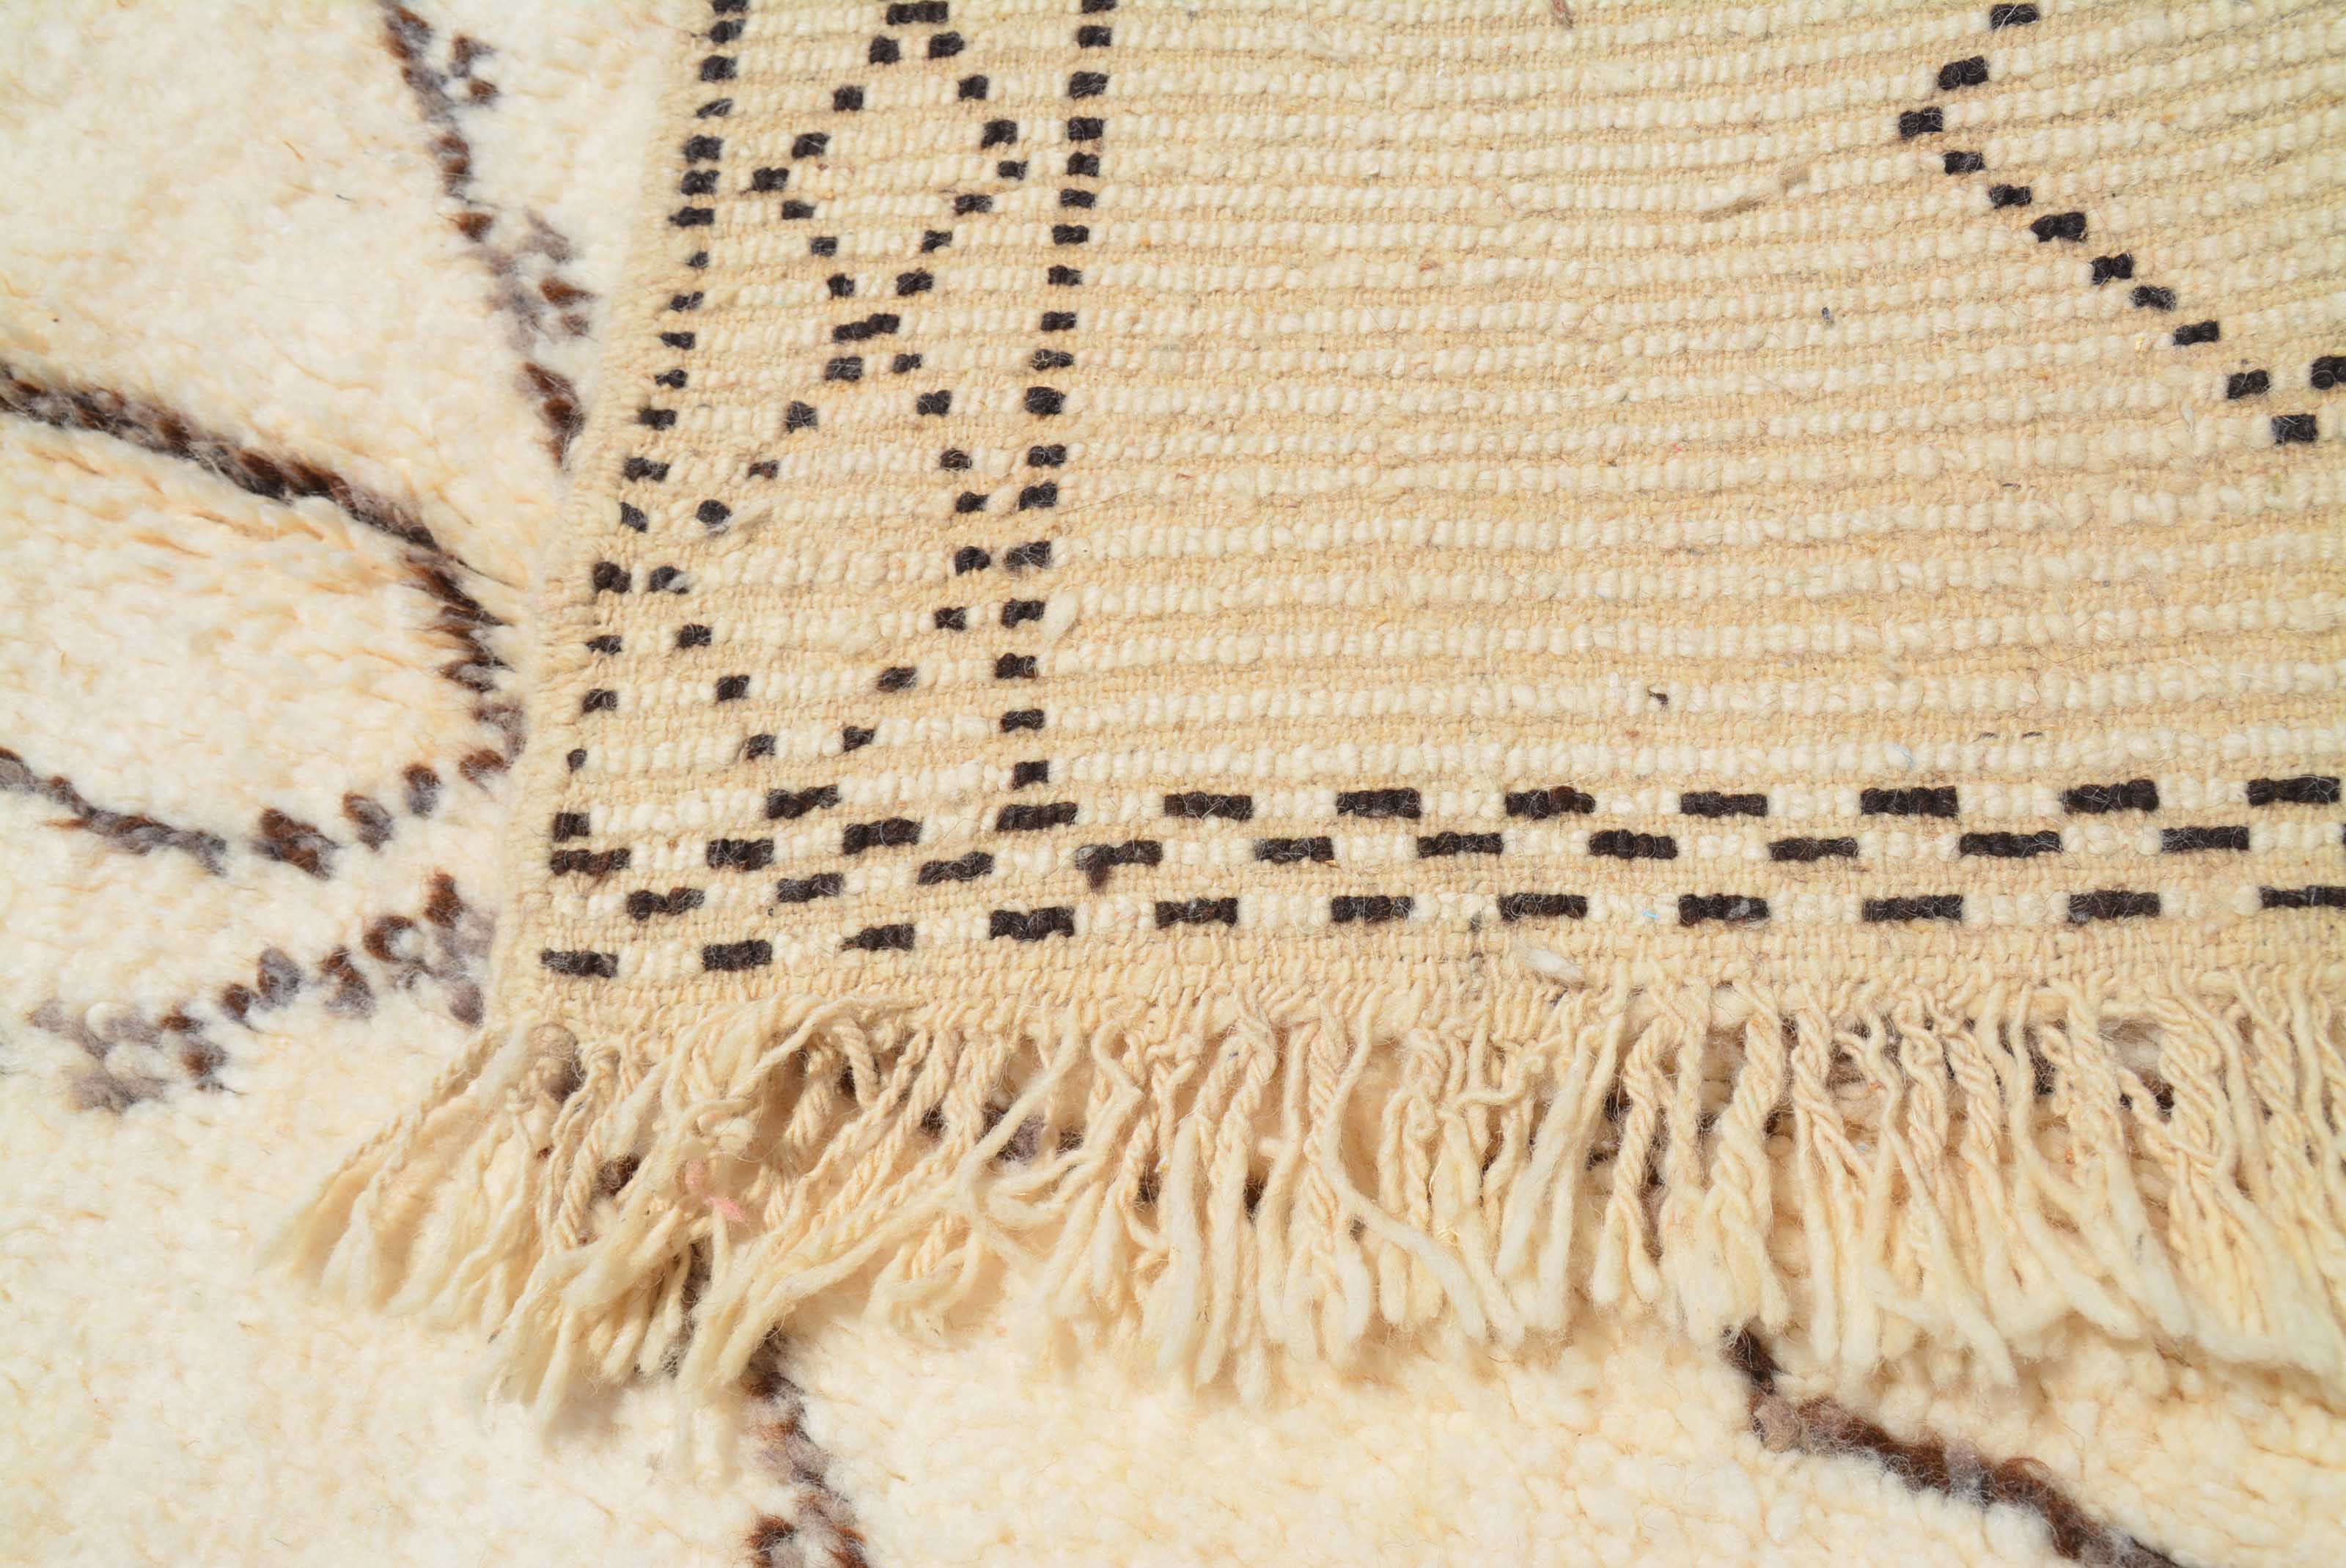 Moroccan Rug Colorful Moroccan Rug For Sale | Tribal Moroccan Rugs Illuminate Collective